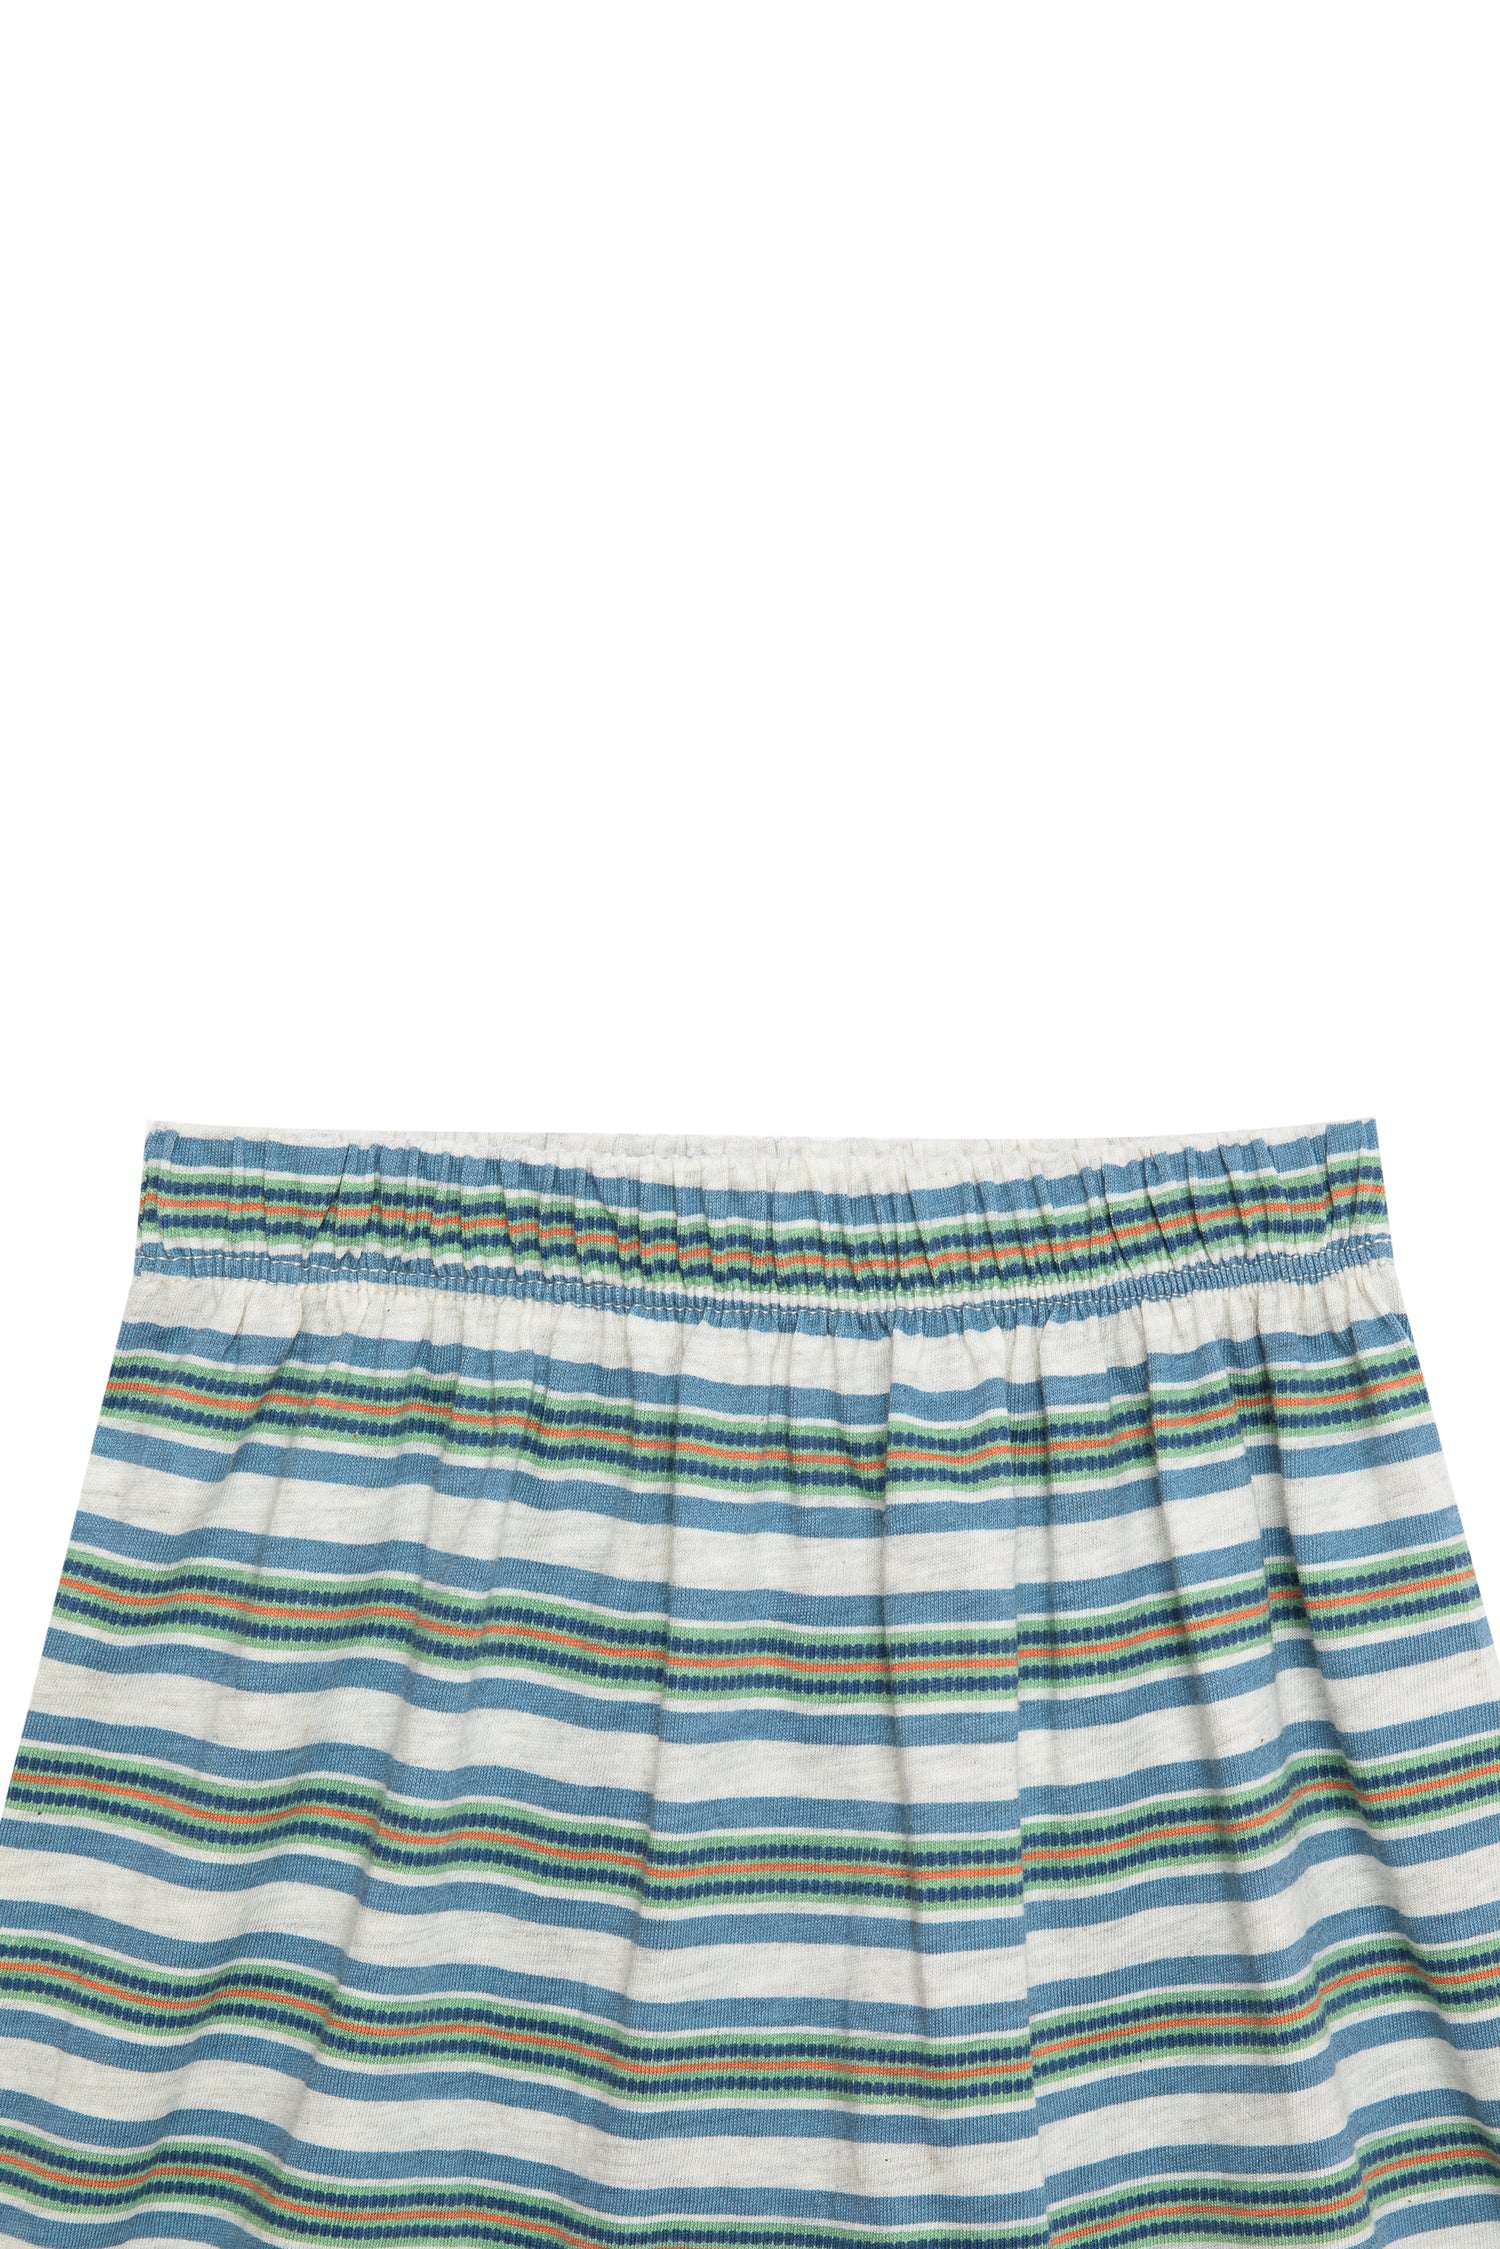 Close up view of striped blue, white, orange, and green shorts 